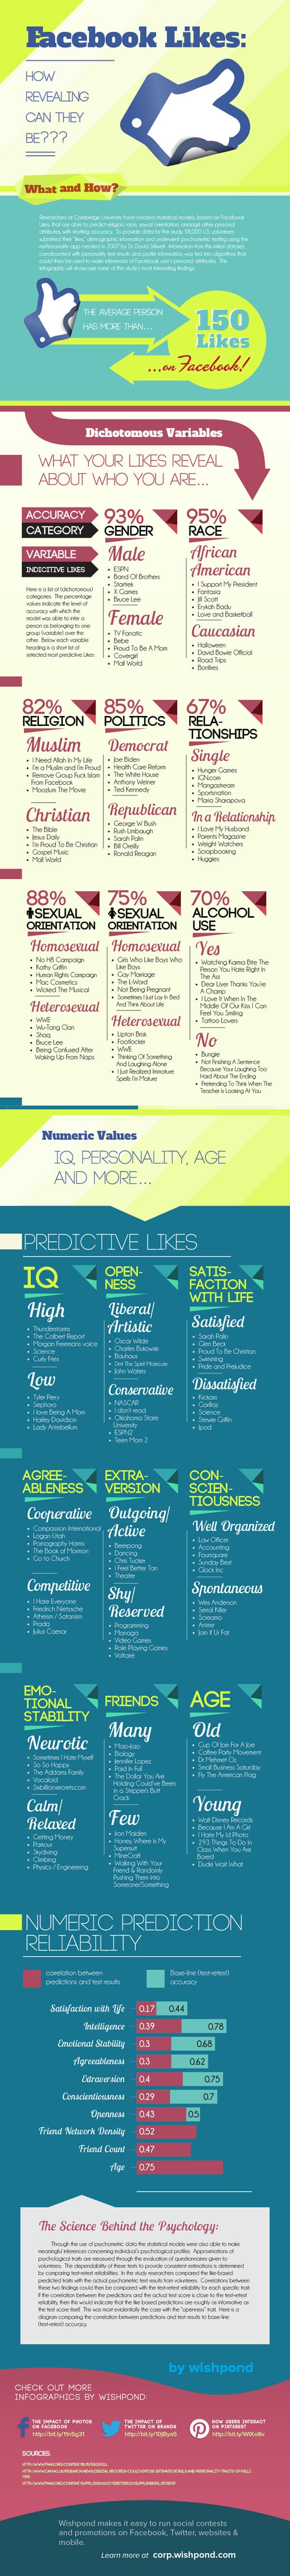 What Your Facebook Likes Say About You [Infographic]